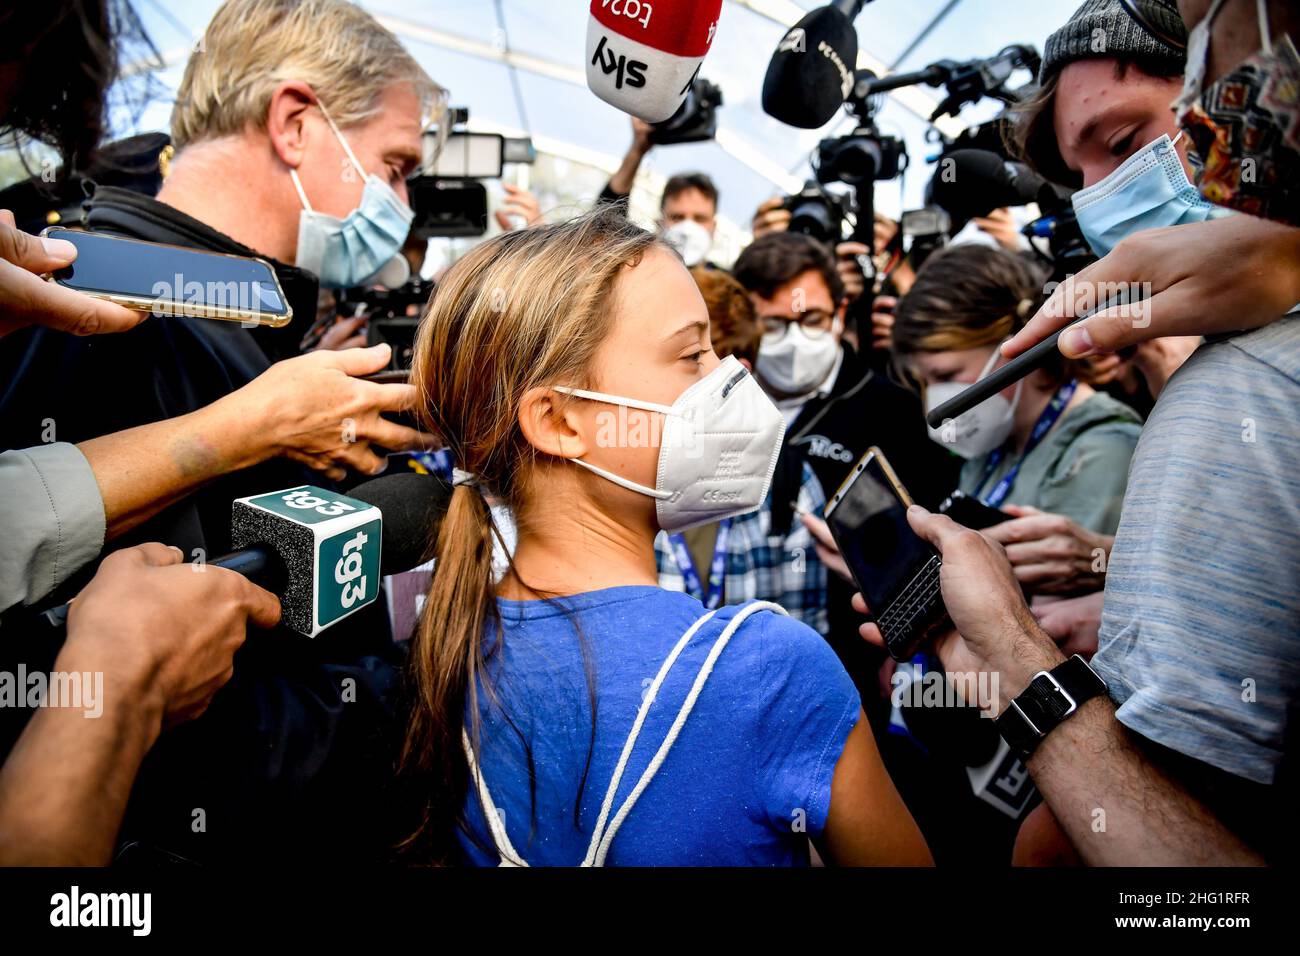 Claudio Furlan/LaPresse September 28, 2021 Milano , Italy News Arrival of environmental activist Greta Thunberg at the Youth4Climate conference Stock Photo